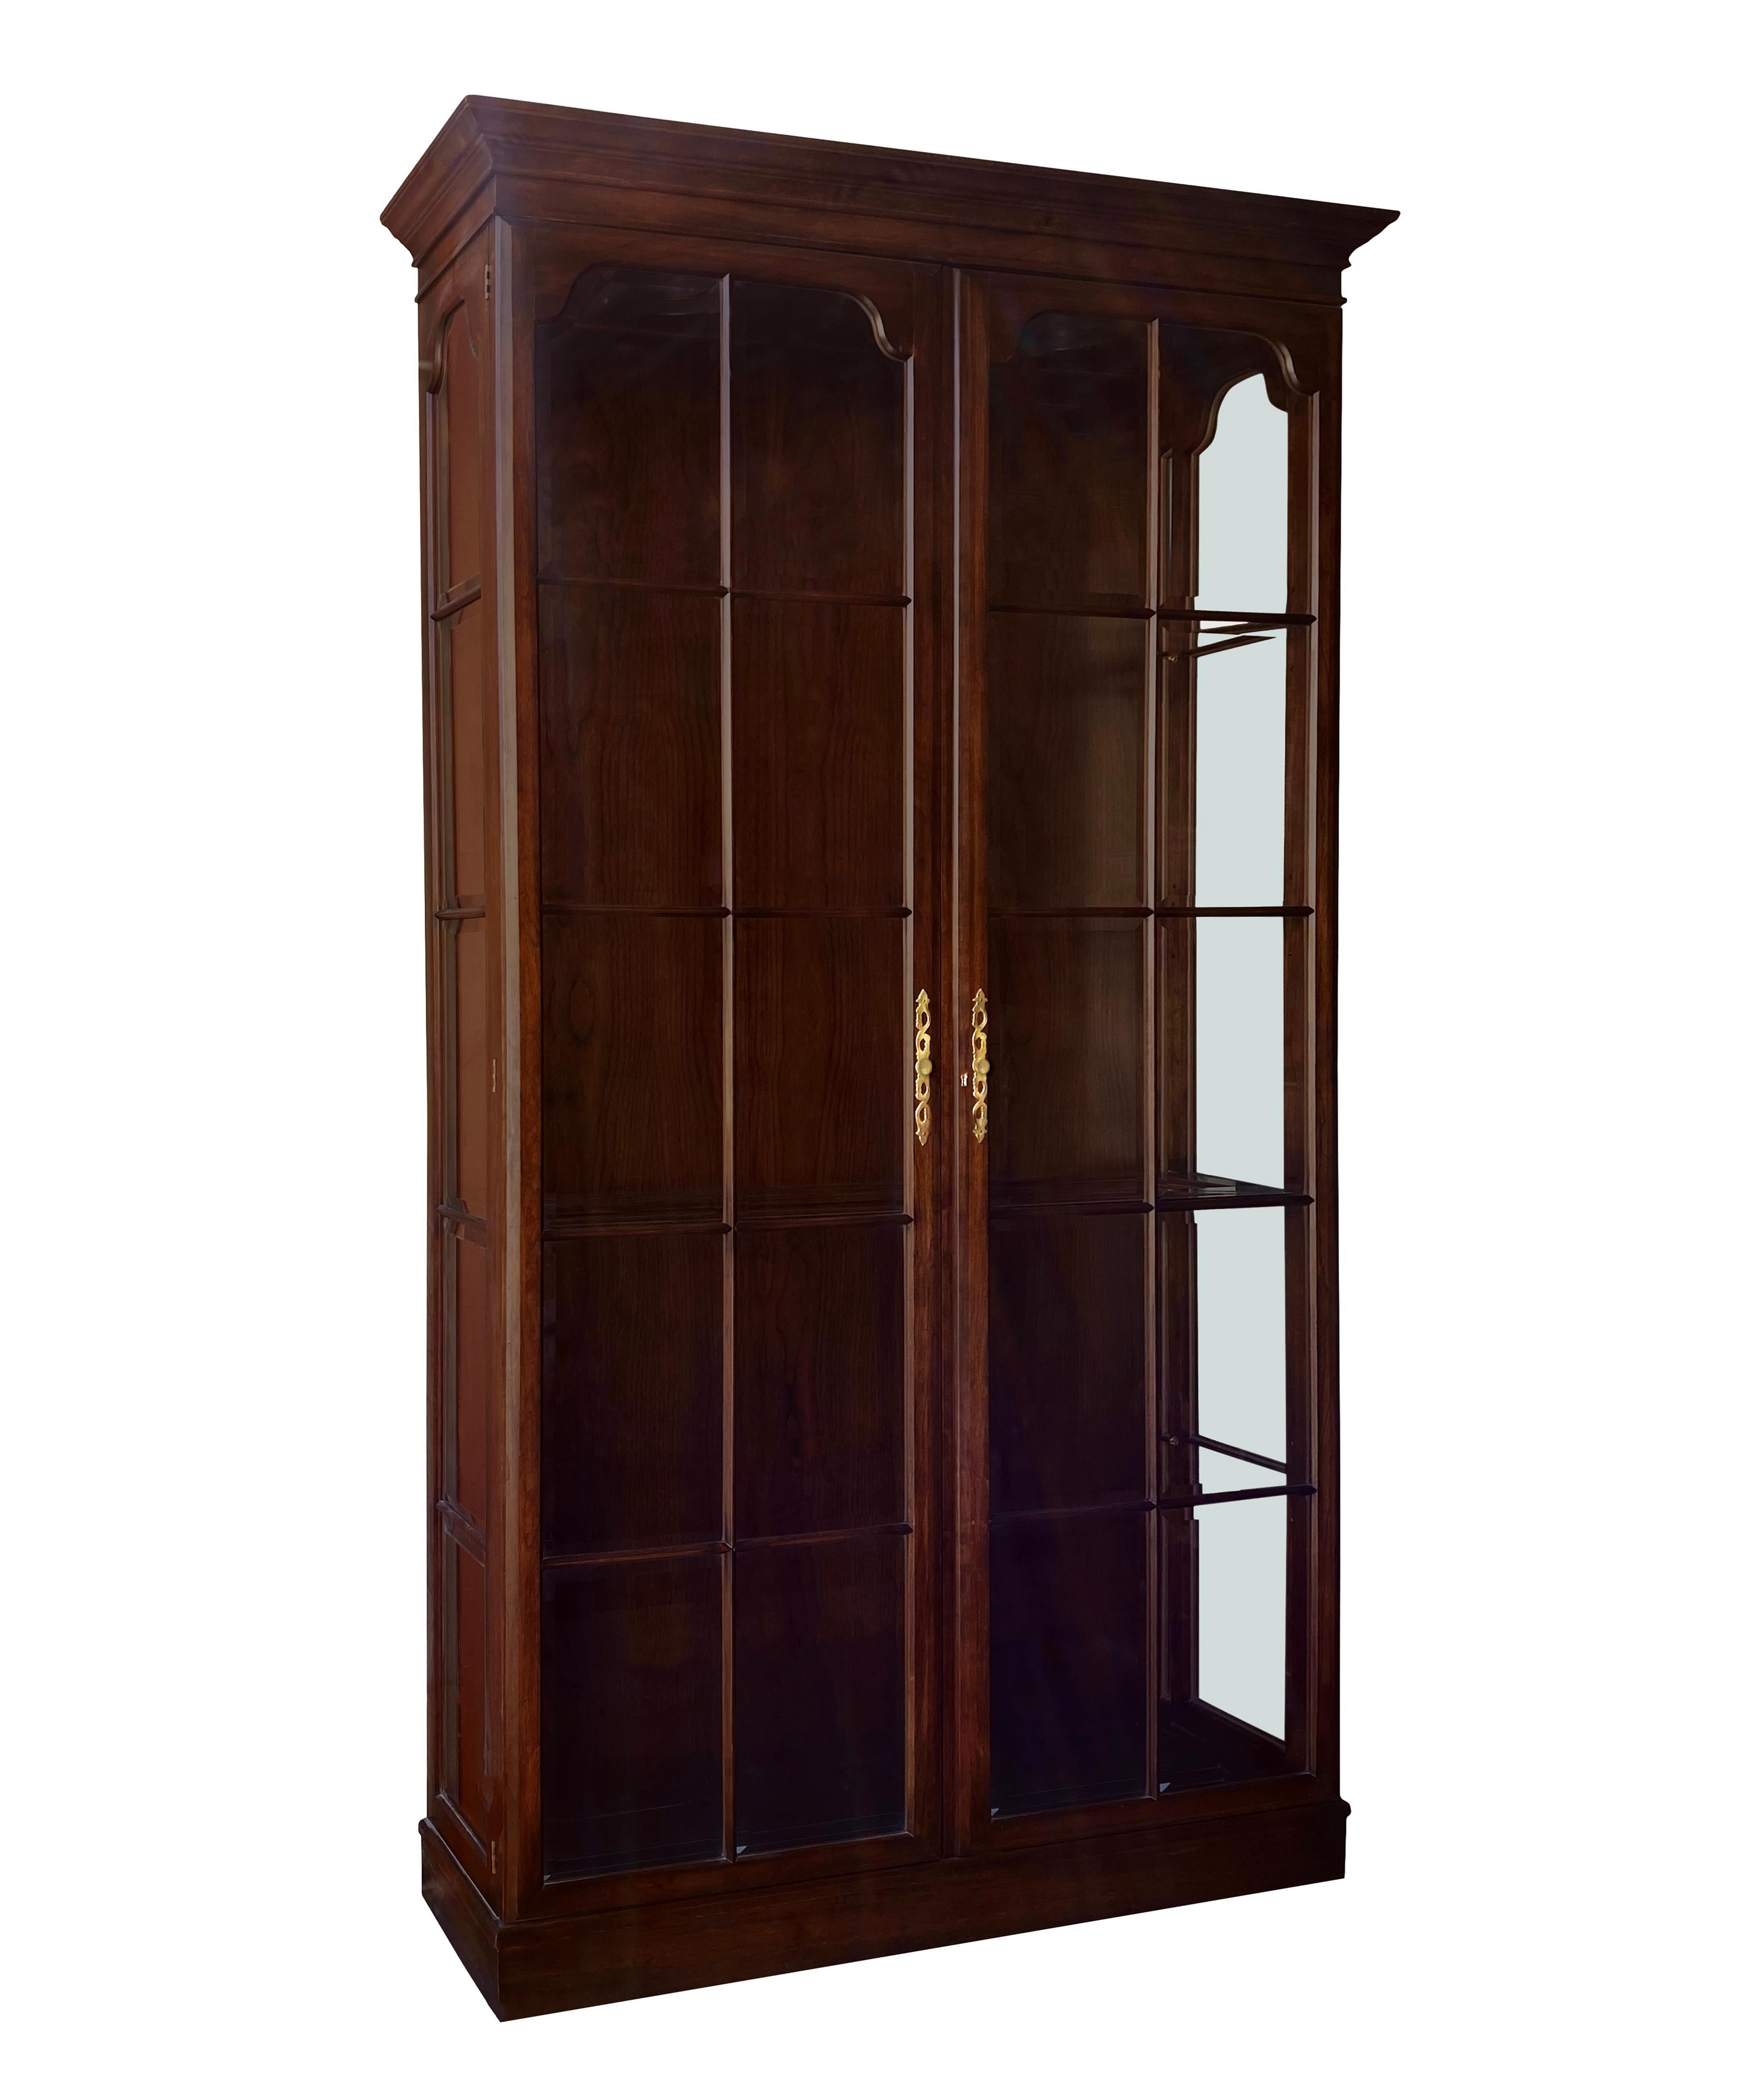 A Thomasville Furniture Collectors Cherry collection display cabinet with brass hardware and glass shelves. Piece has wiring for two recessed lights above and a plug. Piece is in good condition. Note that in two of the photos, the knobs have not